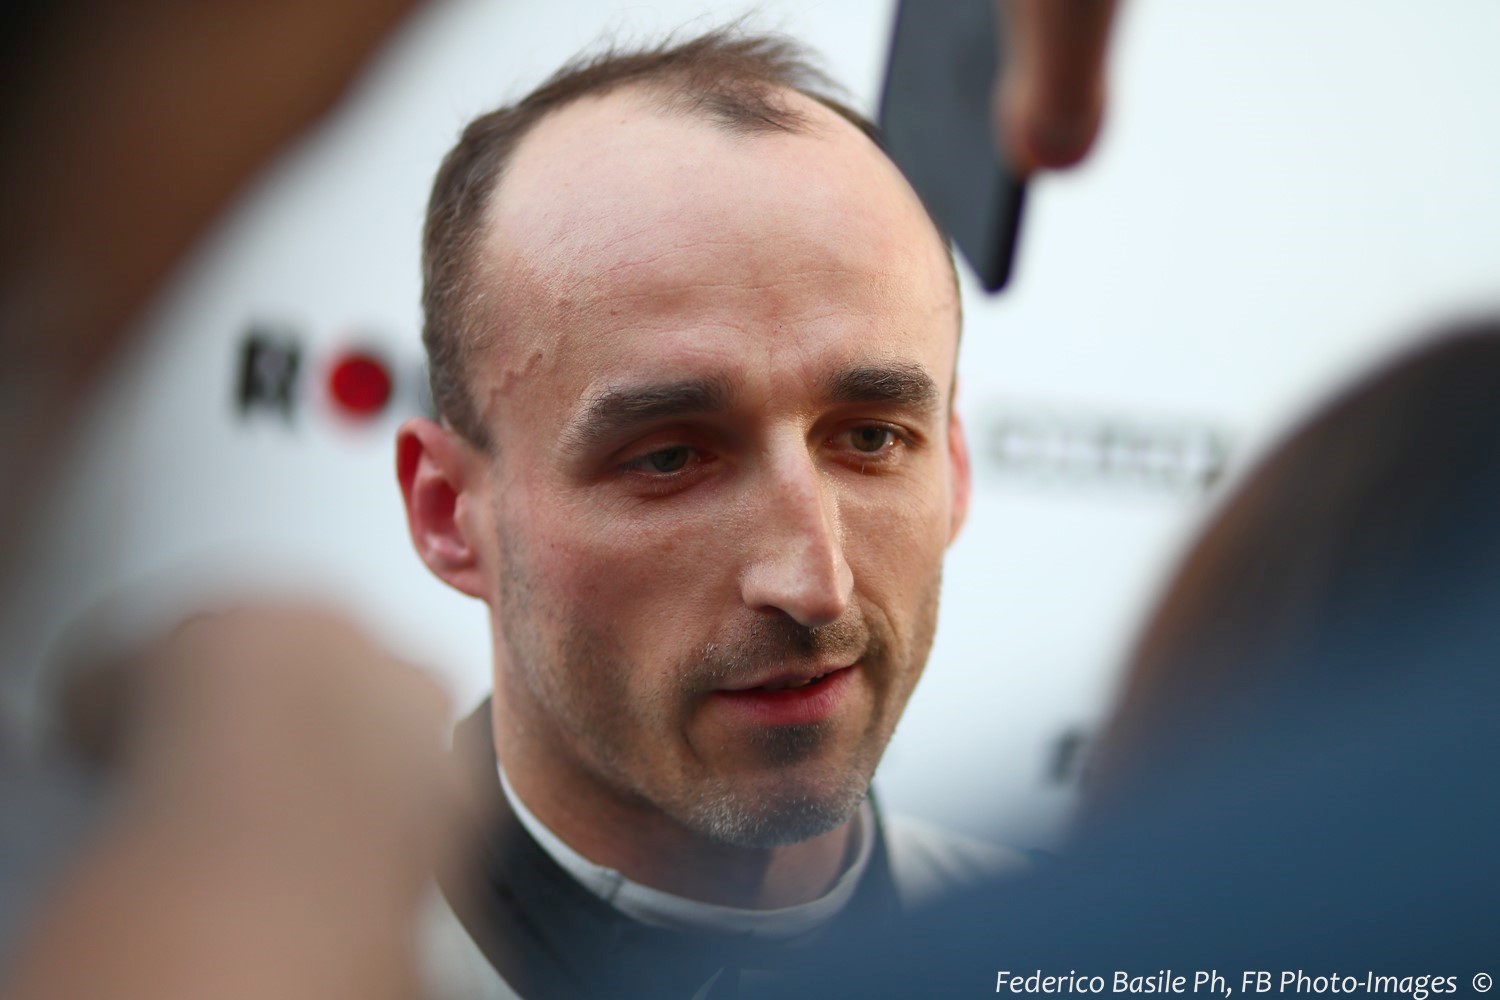 Kubica endures final race for Williams this weekend